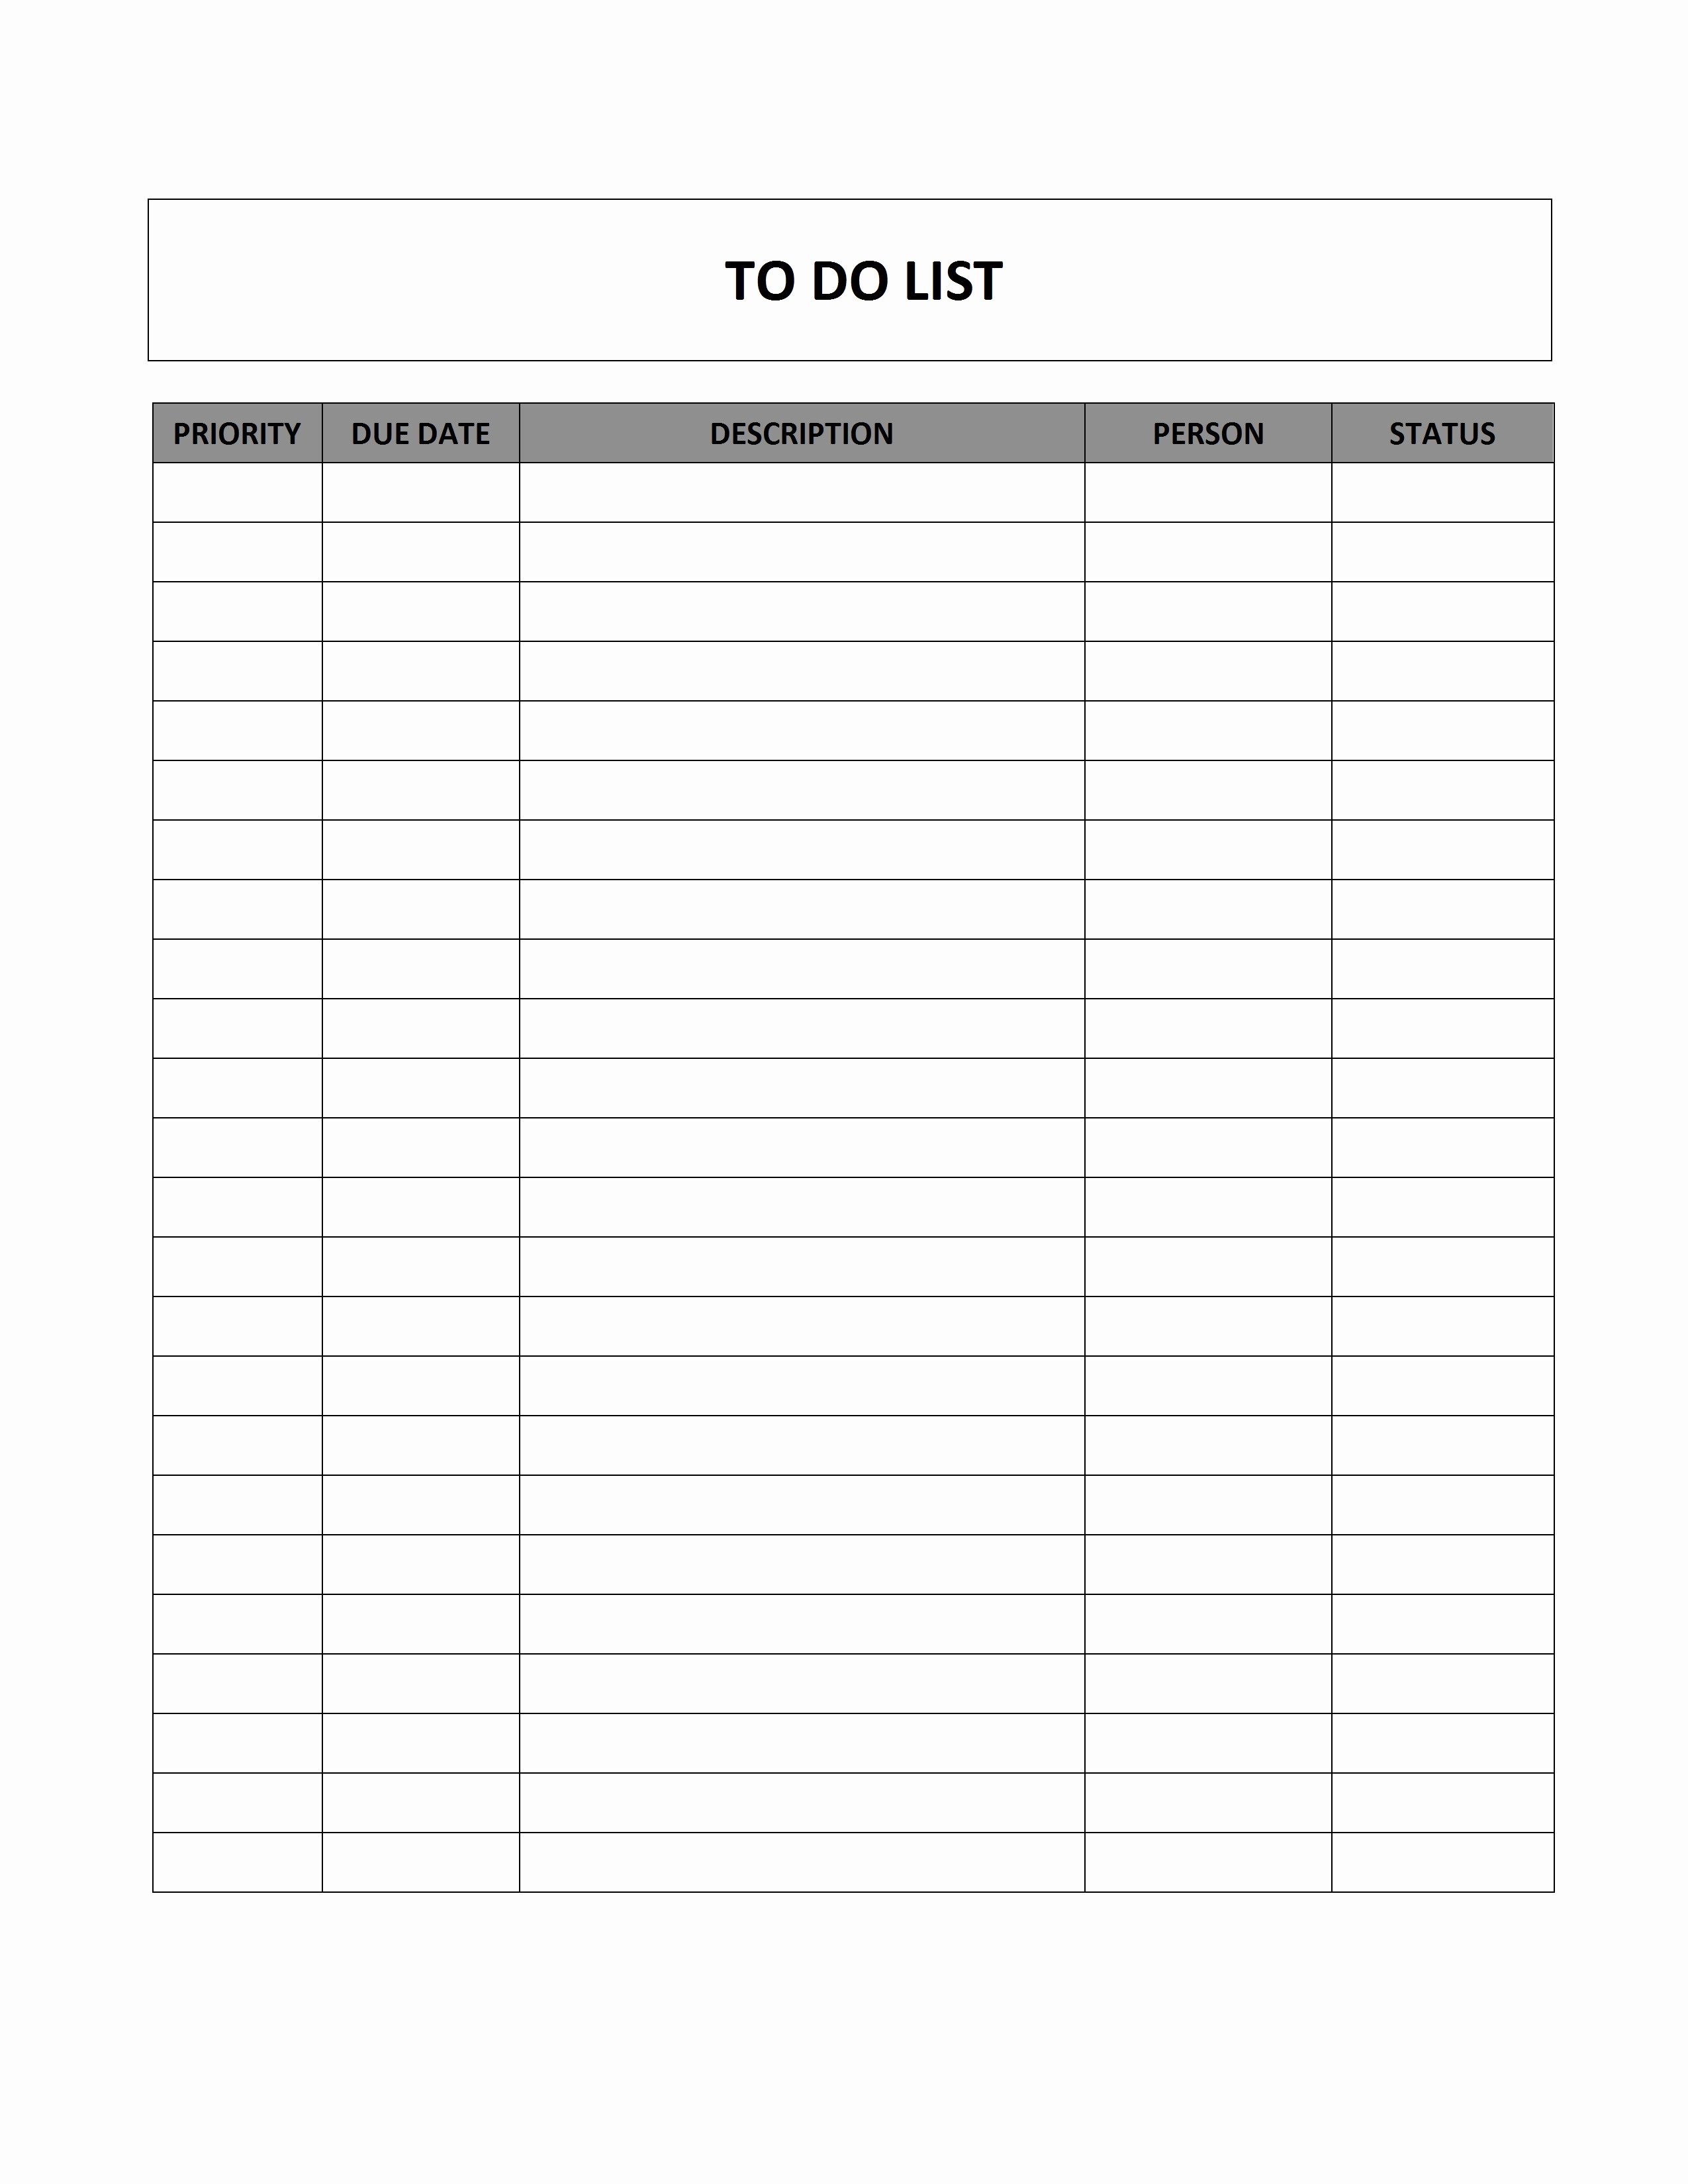 Microsoft to Do List Template New to Do List Template